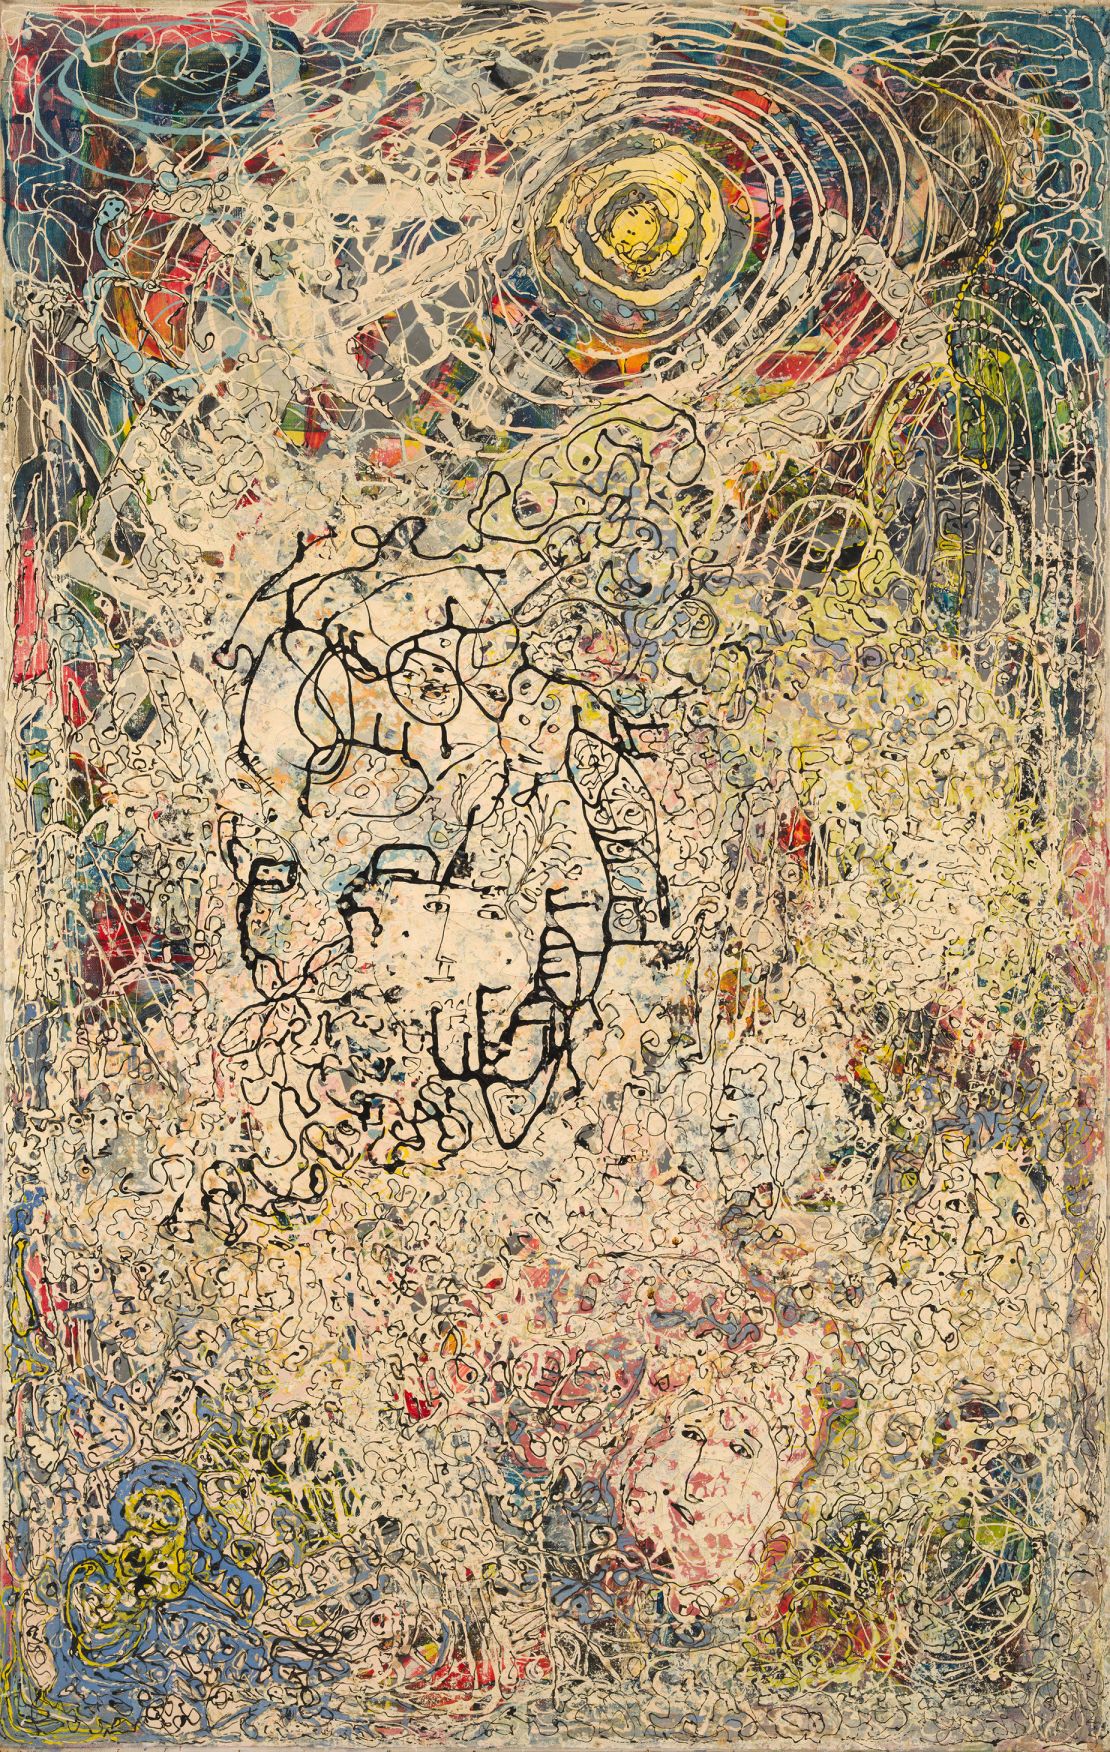 "Heavenly Sympathy," an abstract piece Sobel painted circa 1947, featuring near endless swirls of figures and faces, overlaid one over the other in swarming layers of paint.